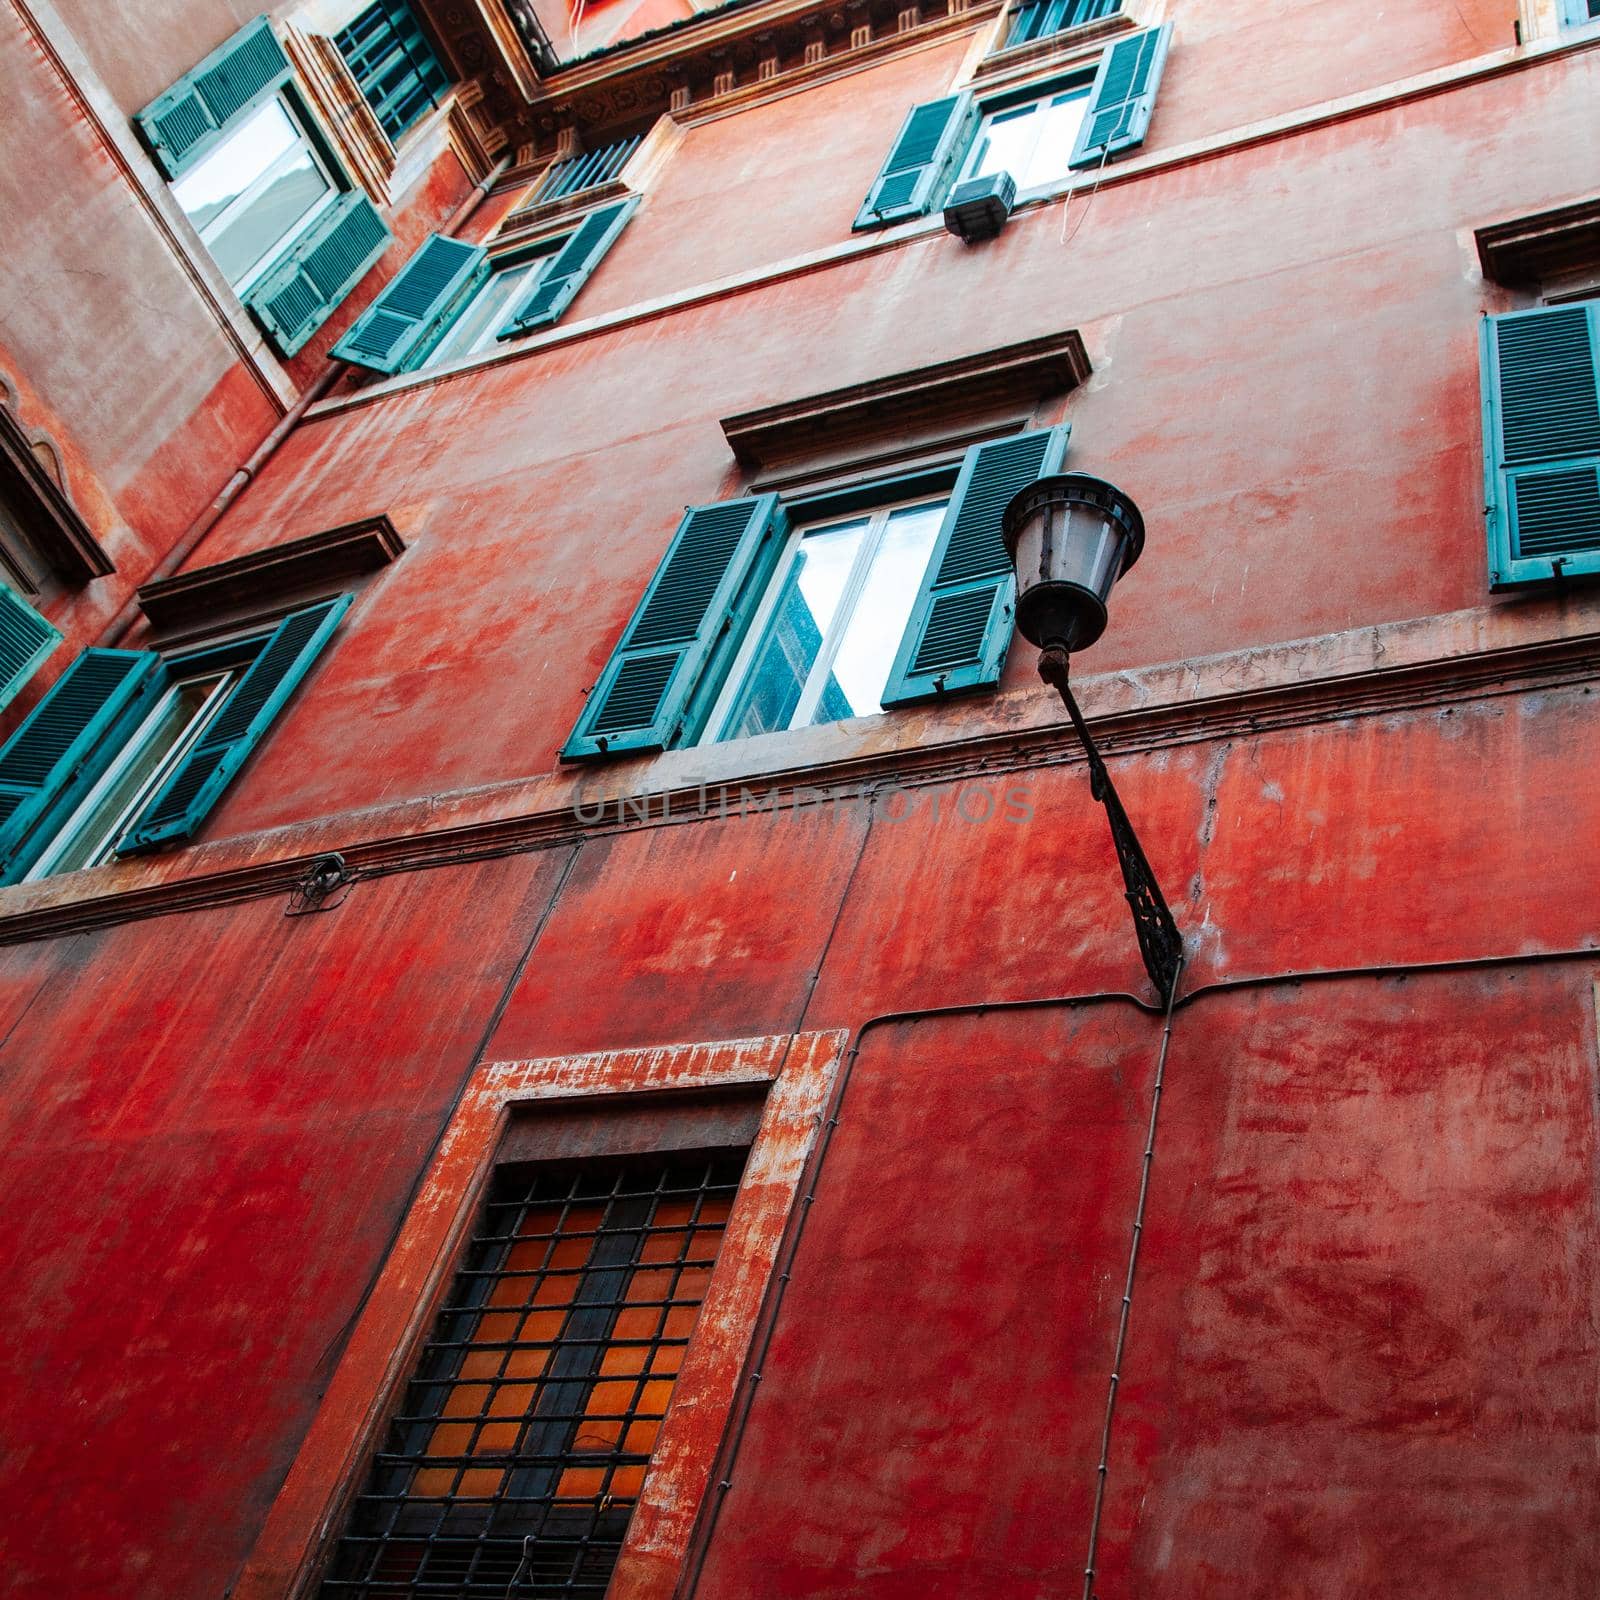 A colorful red wall of an old building in Rome, Italy